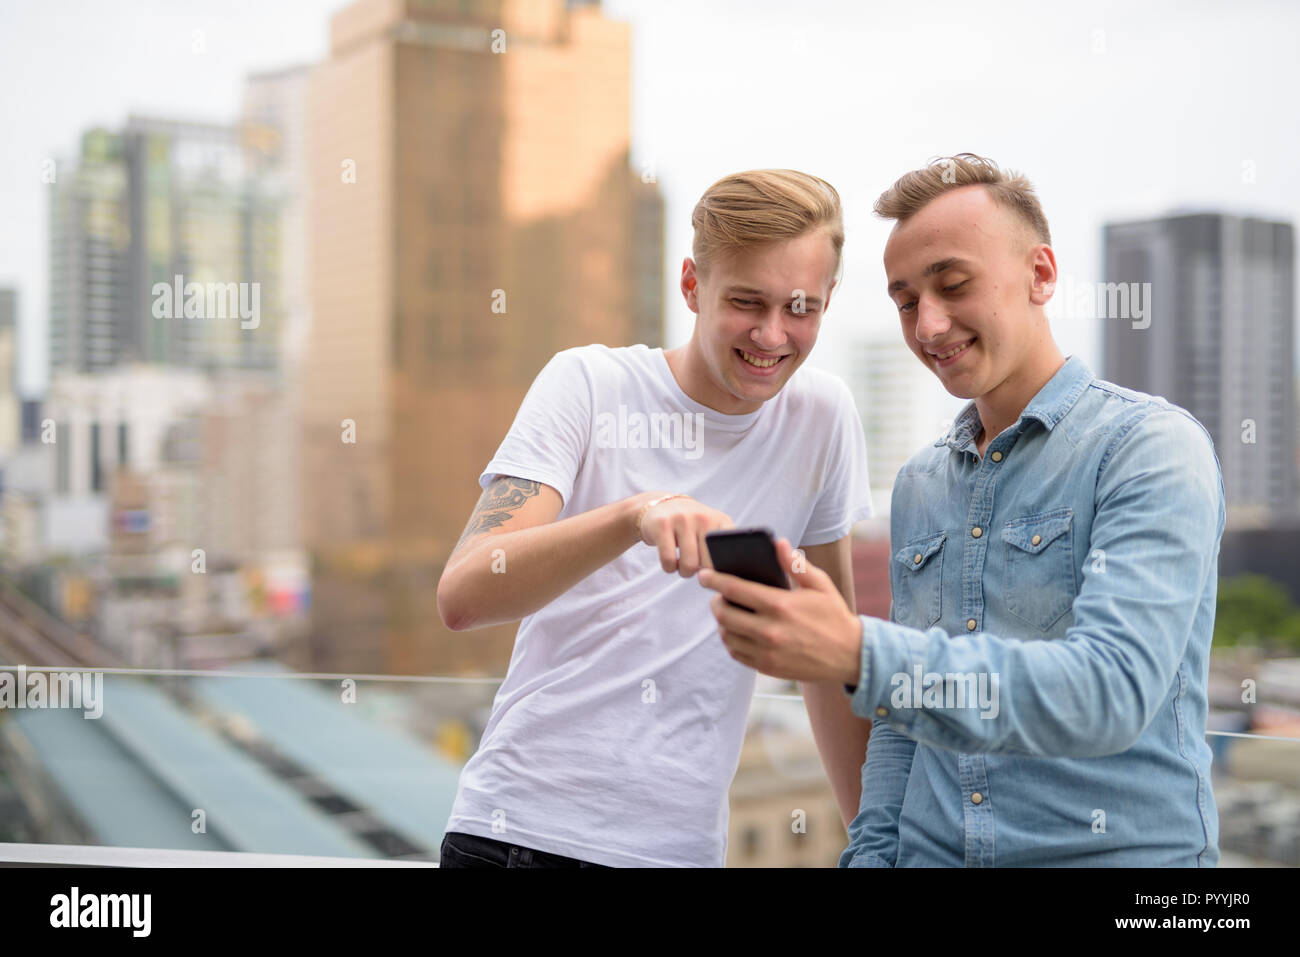 Young happy man couple using mobile phone outdoors Stock Photo